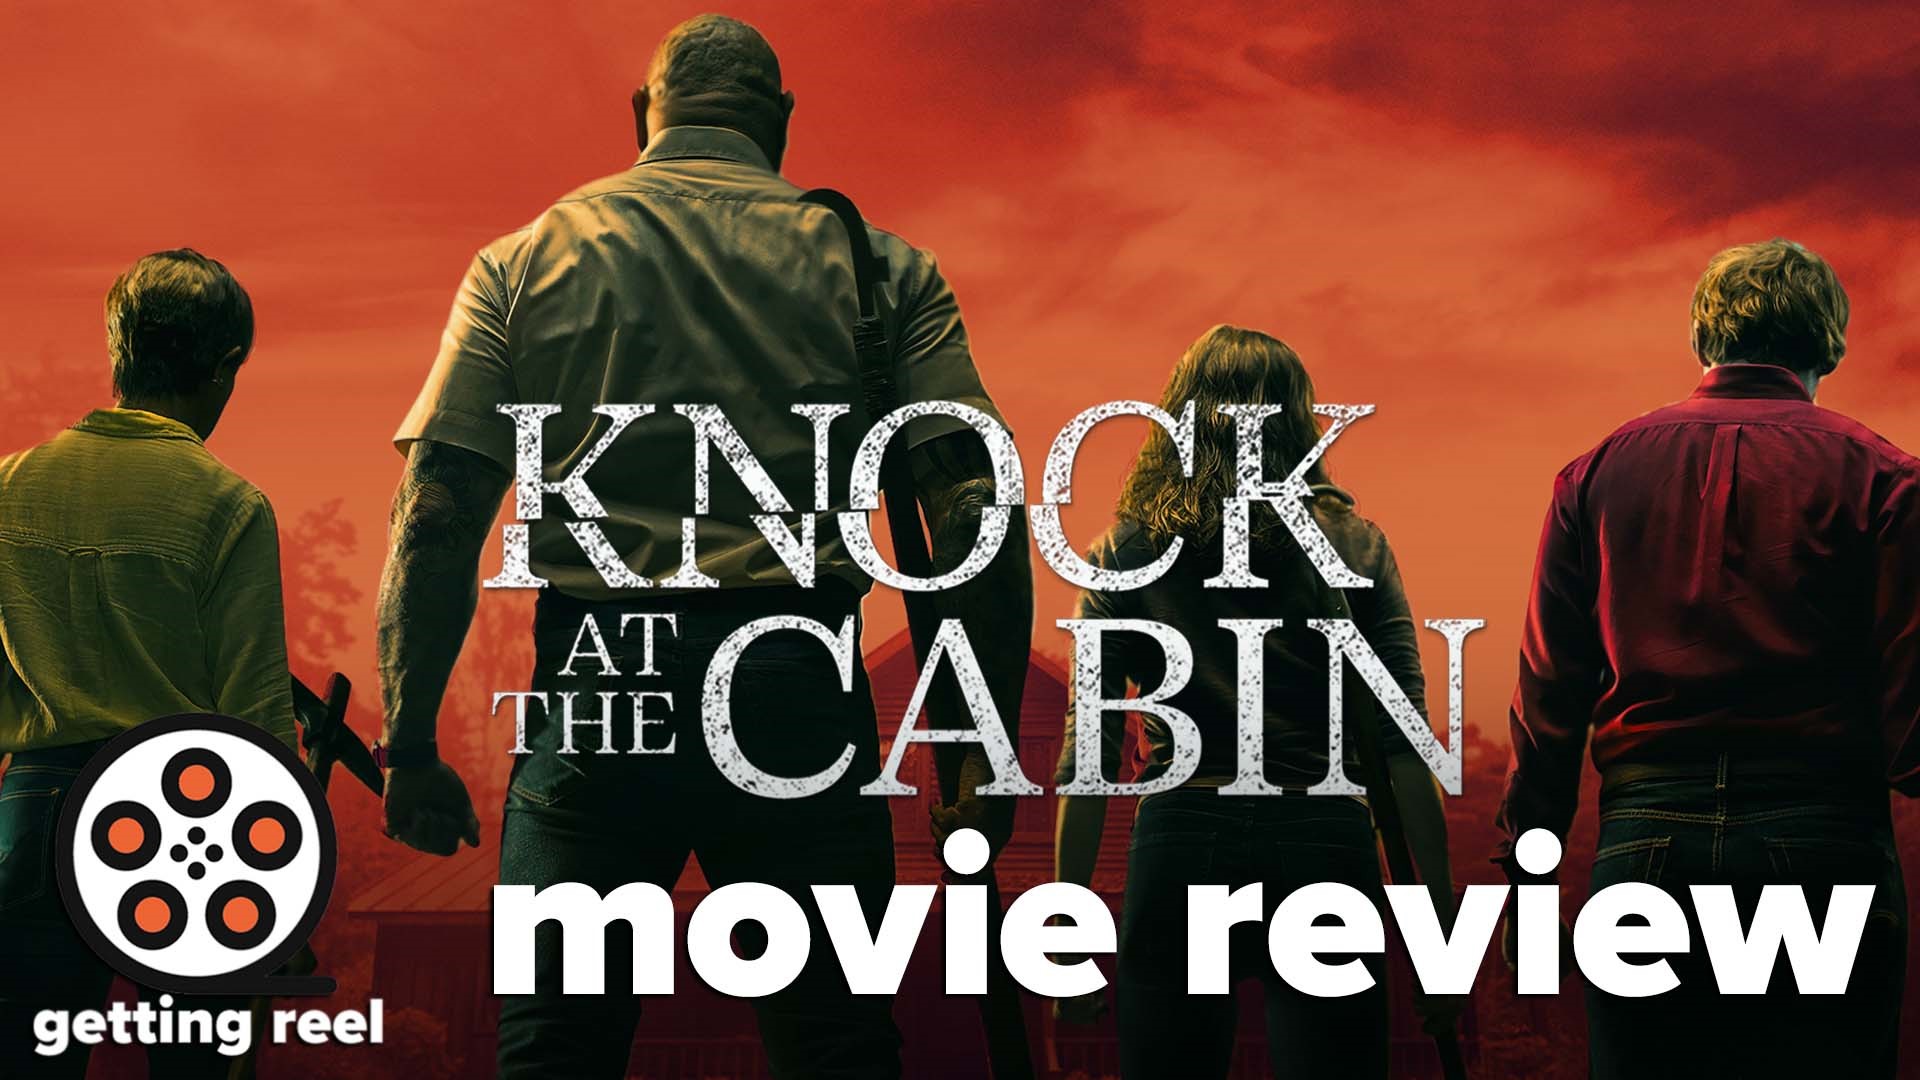 The world is ending and only Dave Bautista can stop it...by starring in M. Night Shyamalan's emotional thriller Knock at the Cabin.